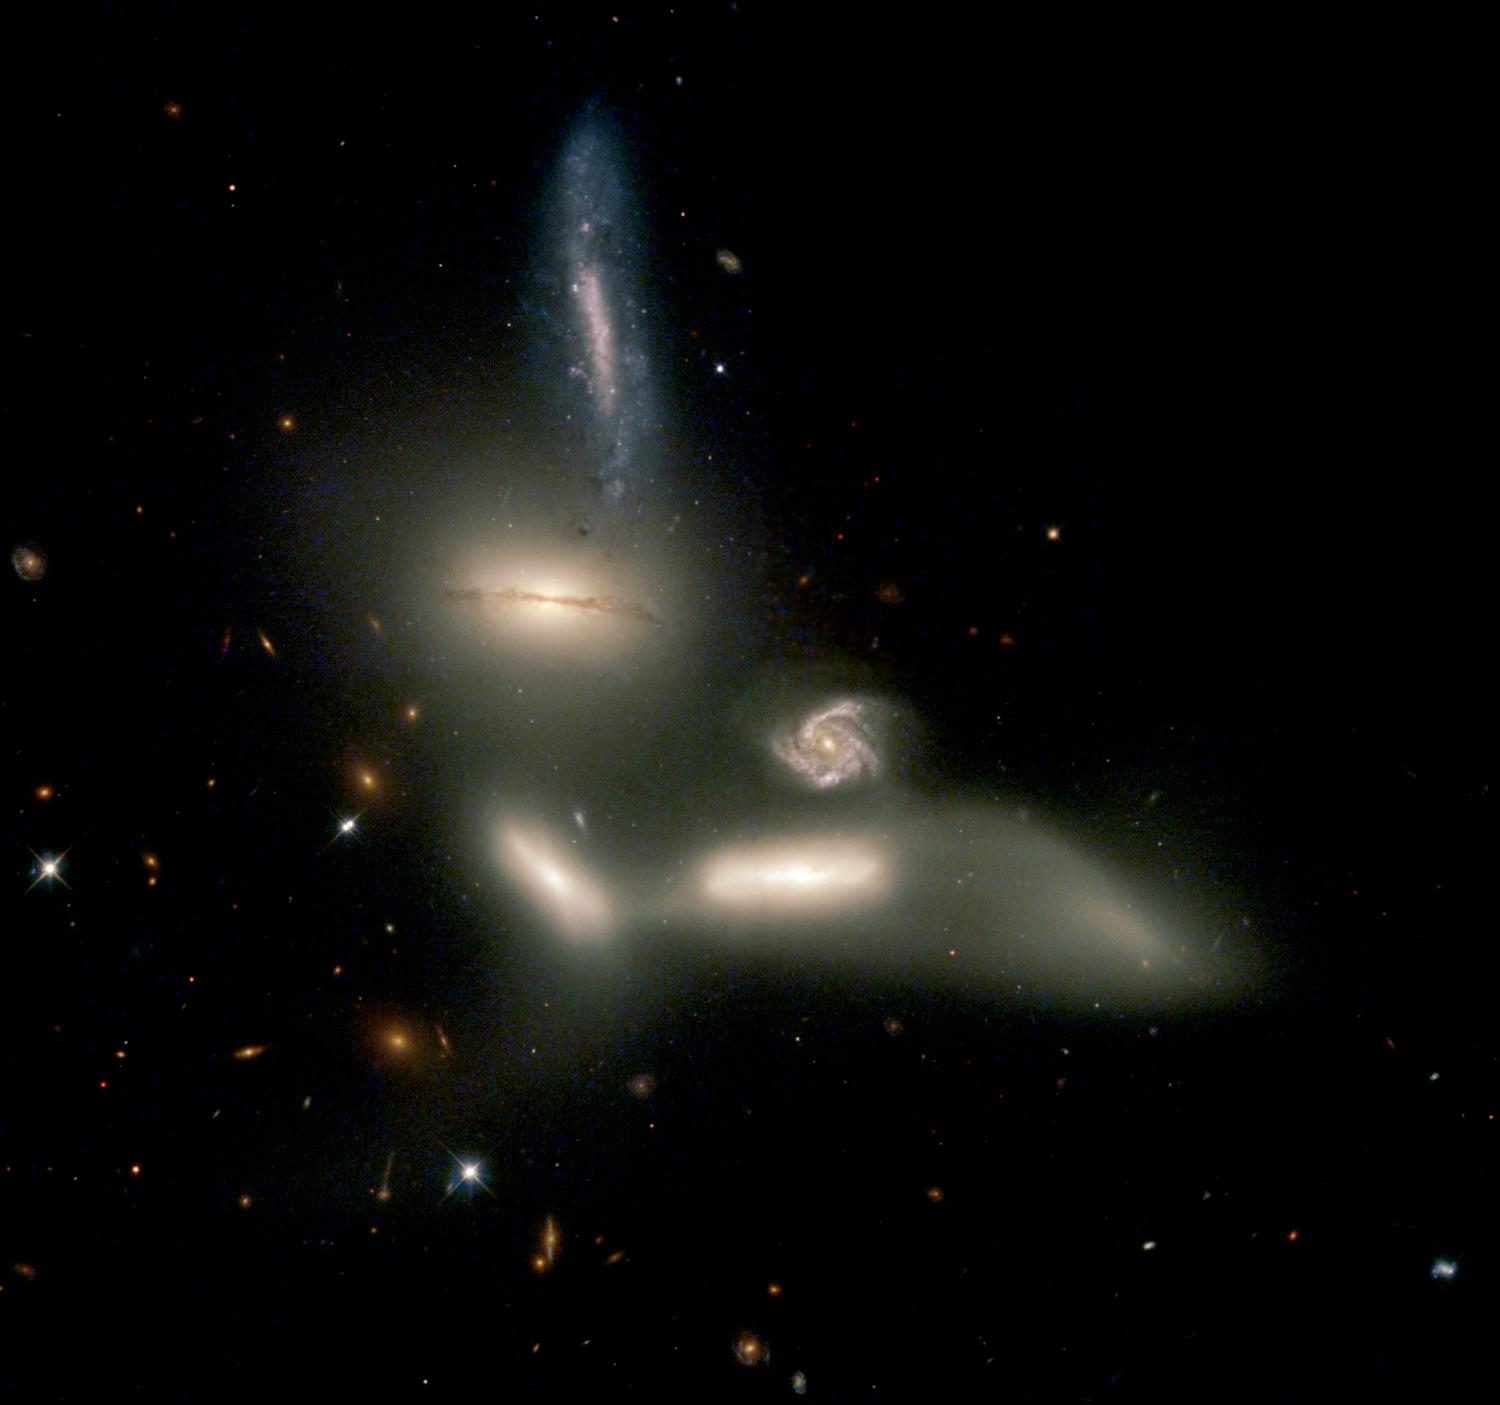 Group of galaxies bunching together with distant galaxies far away in the background.